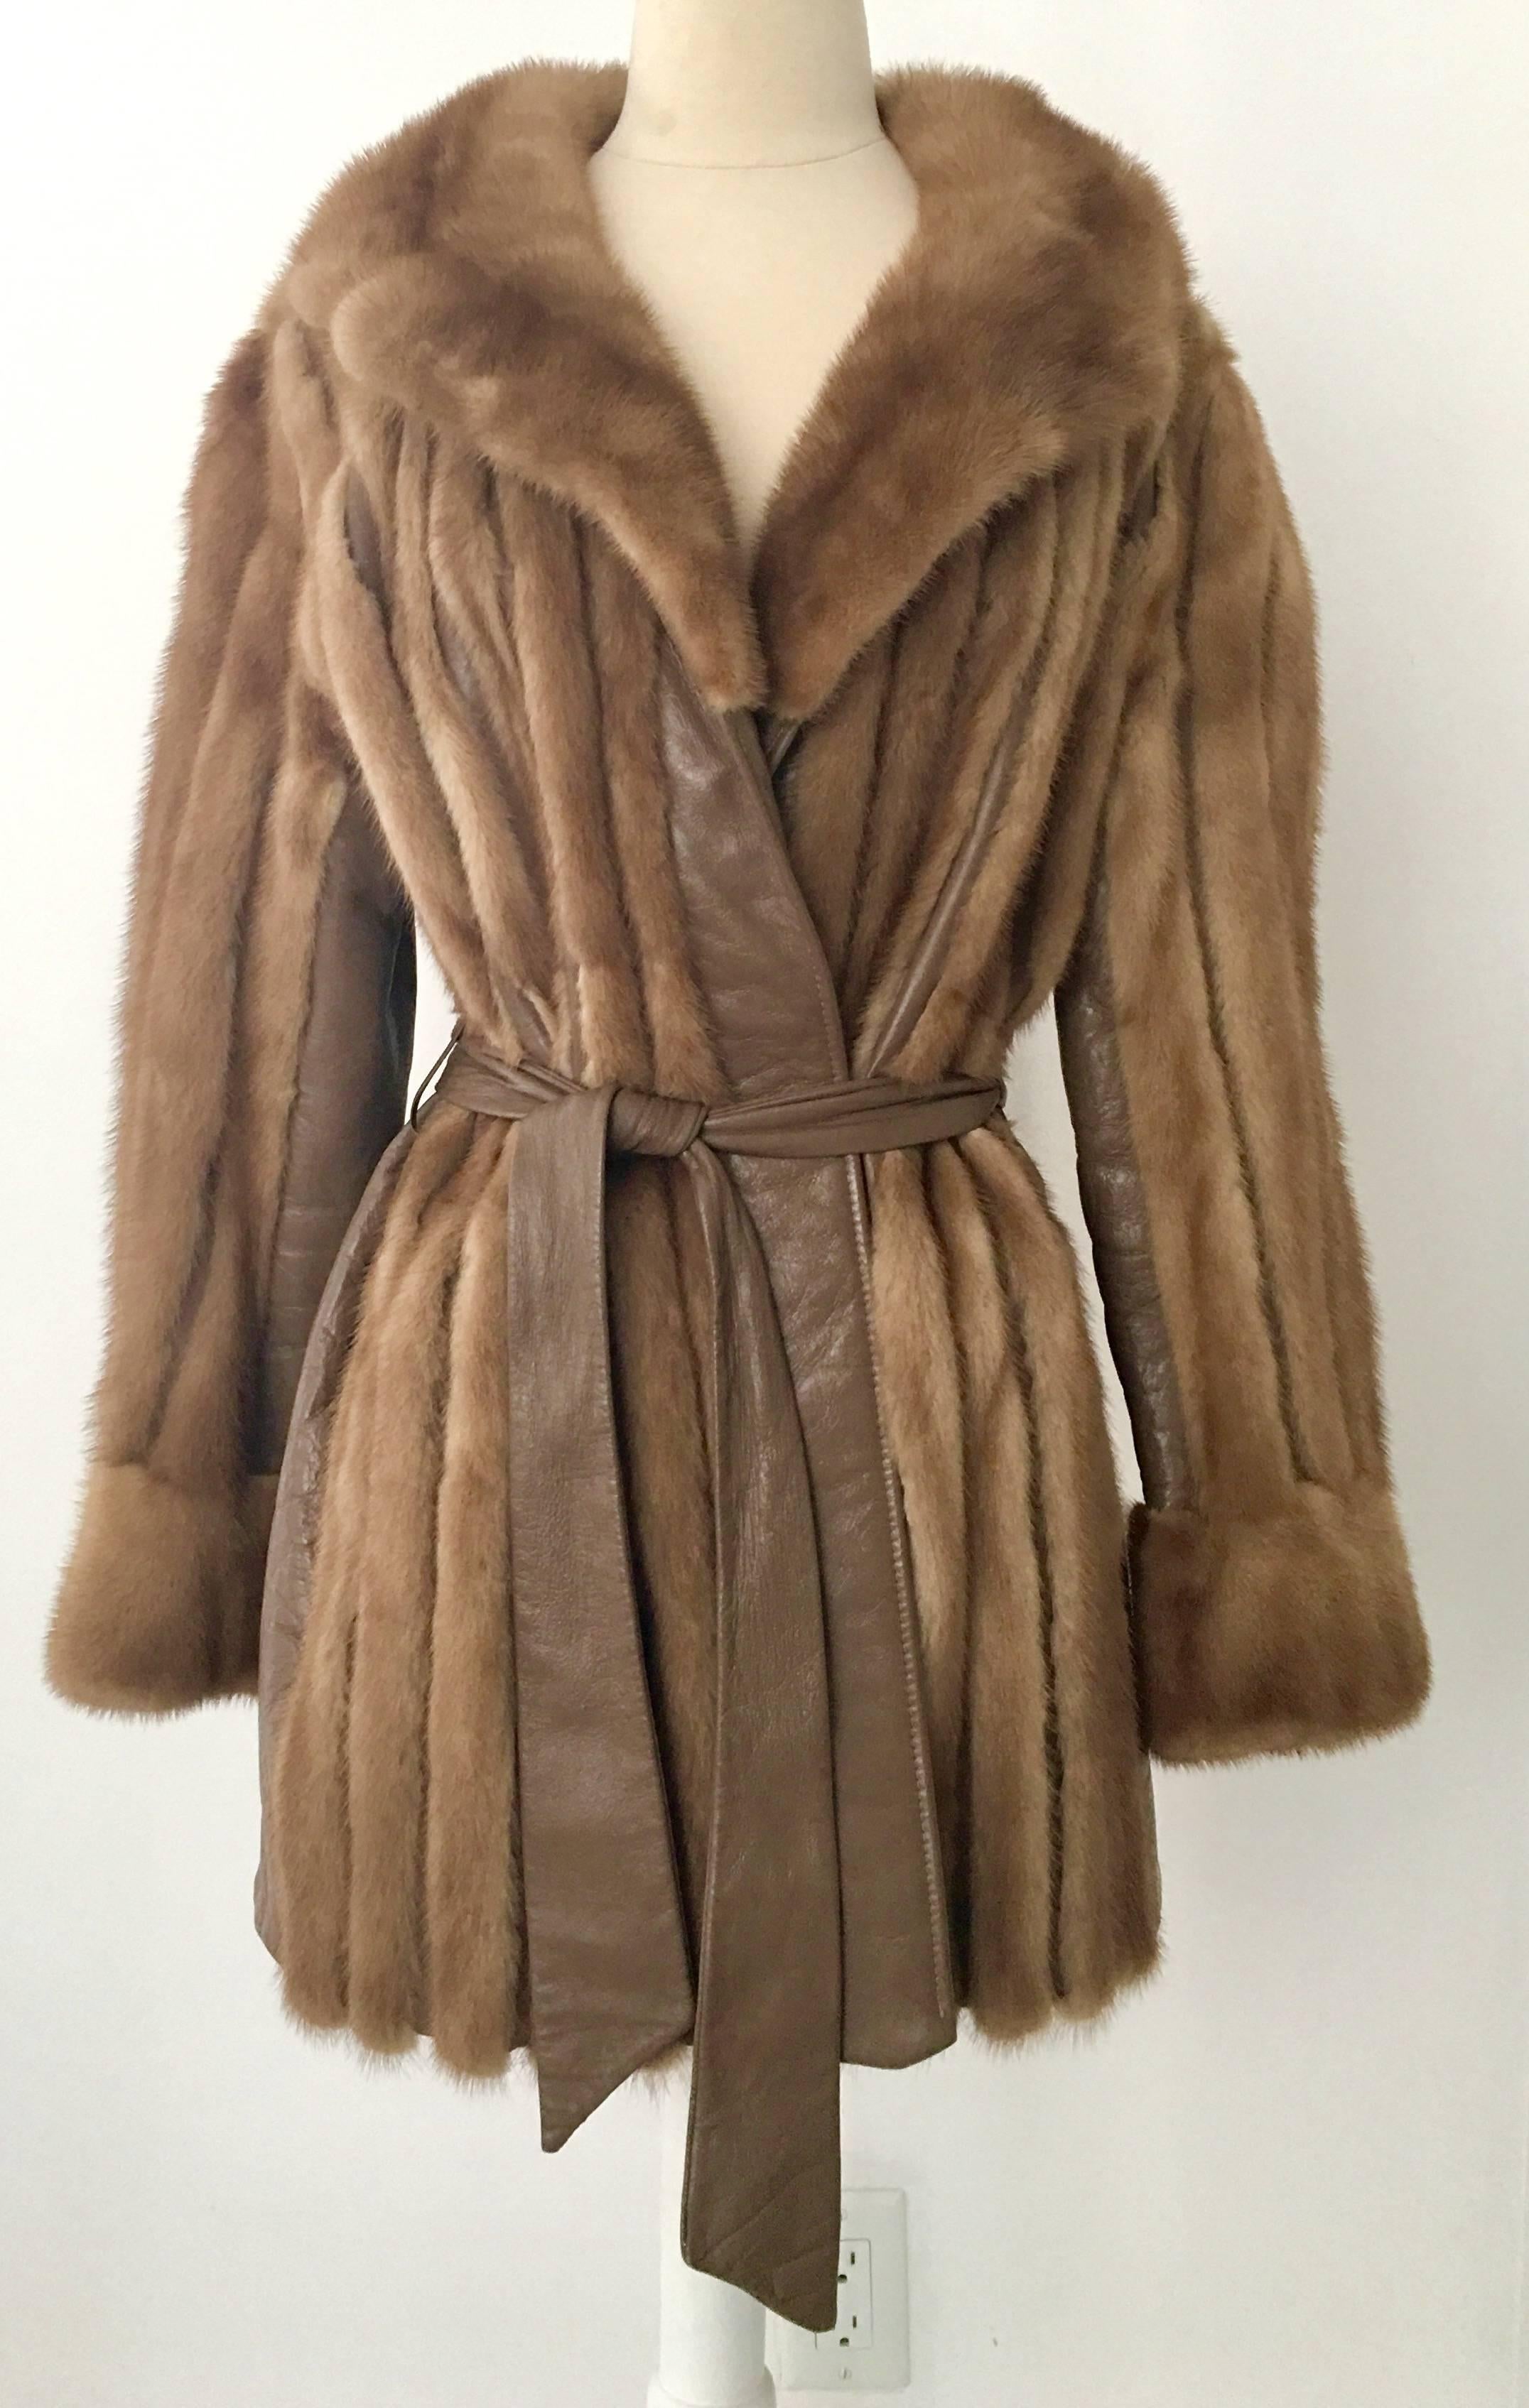 MOD 1970'S Mink & Leather belted panel coat. Rich, silky and luxurious this sleek and timeless coat will keep you warm, stylish and yet it is lightweight .Features a fully lined interior, two front side pockets and the original looped leather belt.